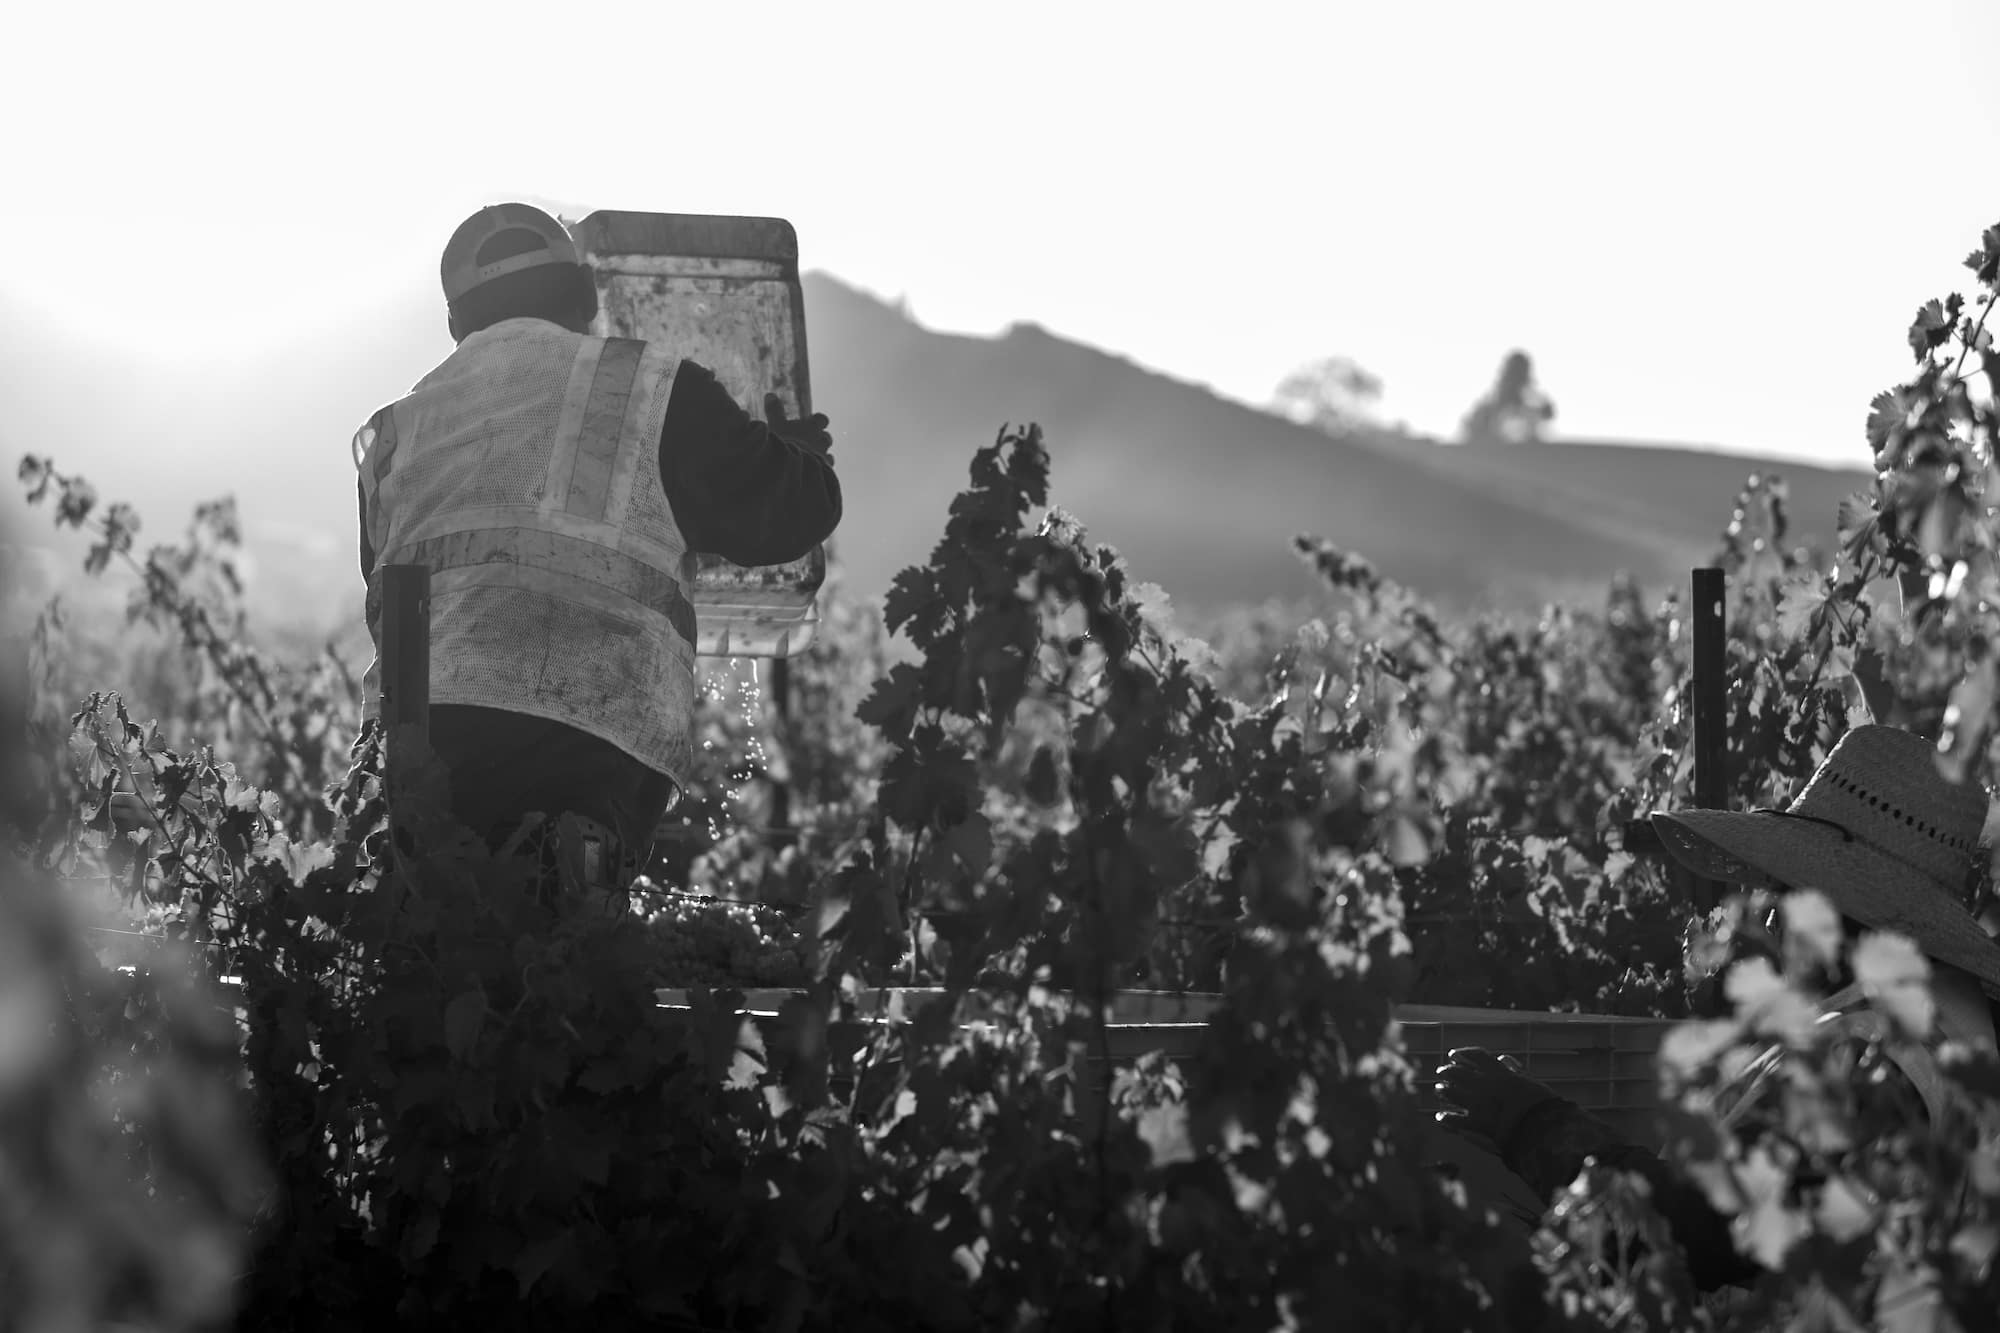 A harvest worker transporting grapes in a vineyard